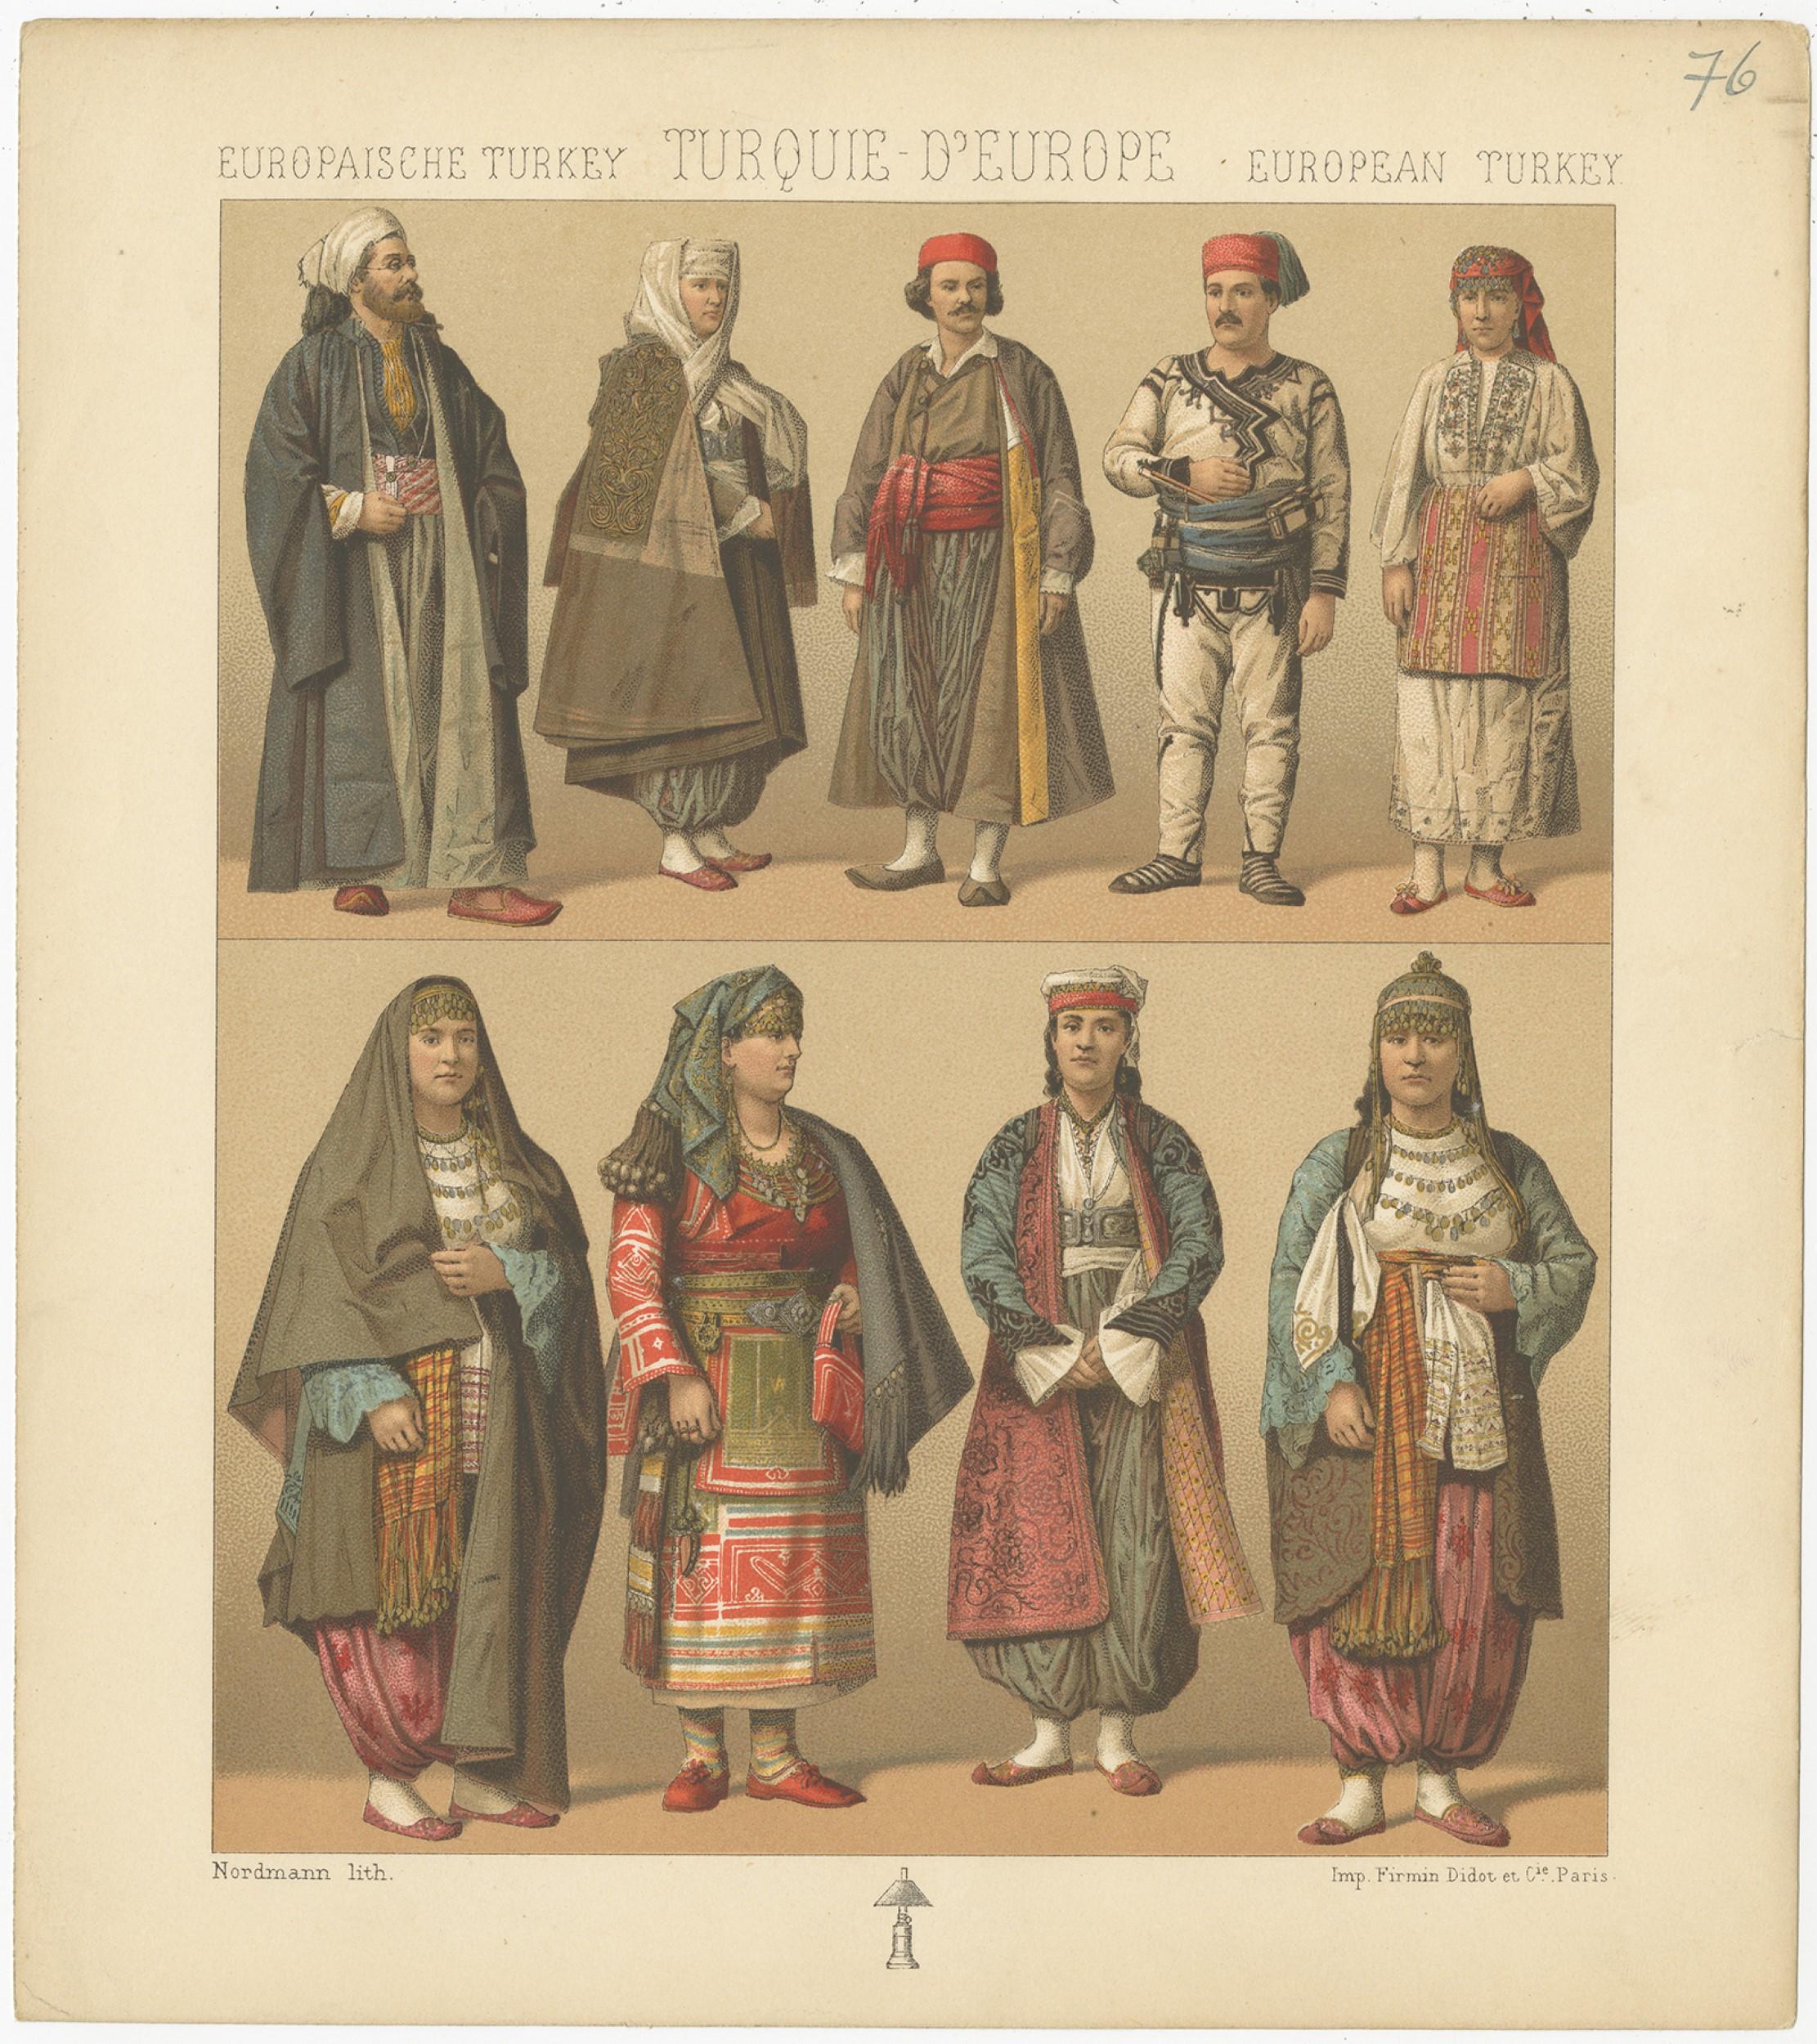 Antique print titled 'Europaische Turkey - Turquie D'Europe - European Turkey'. Chromolithograph of European Turkish costumes. This print originates from 'Le Costume Historique' by M.A. Racinet. Published, circa 1880.